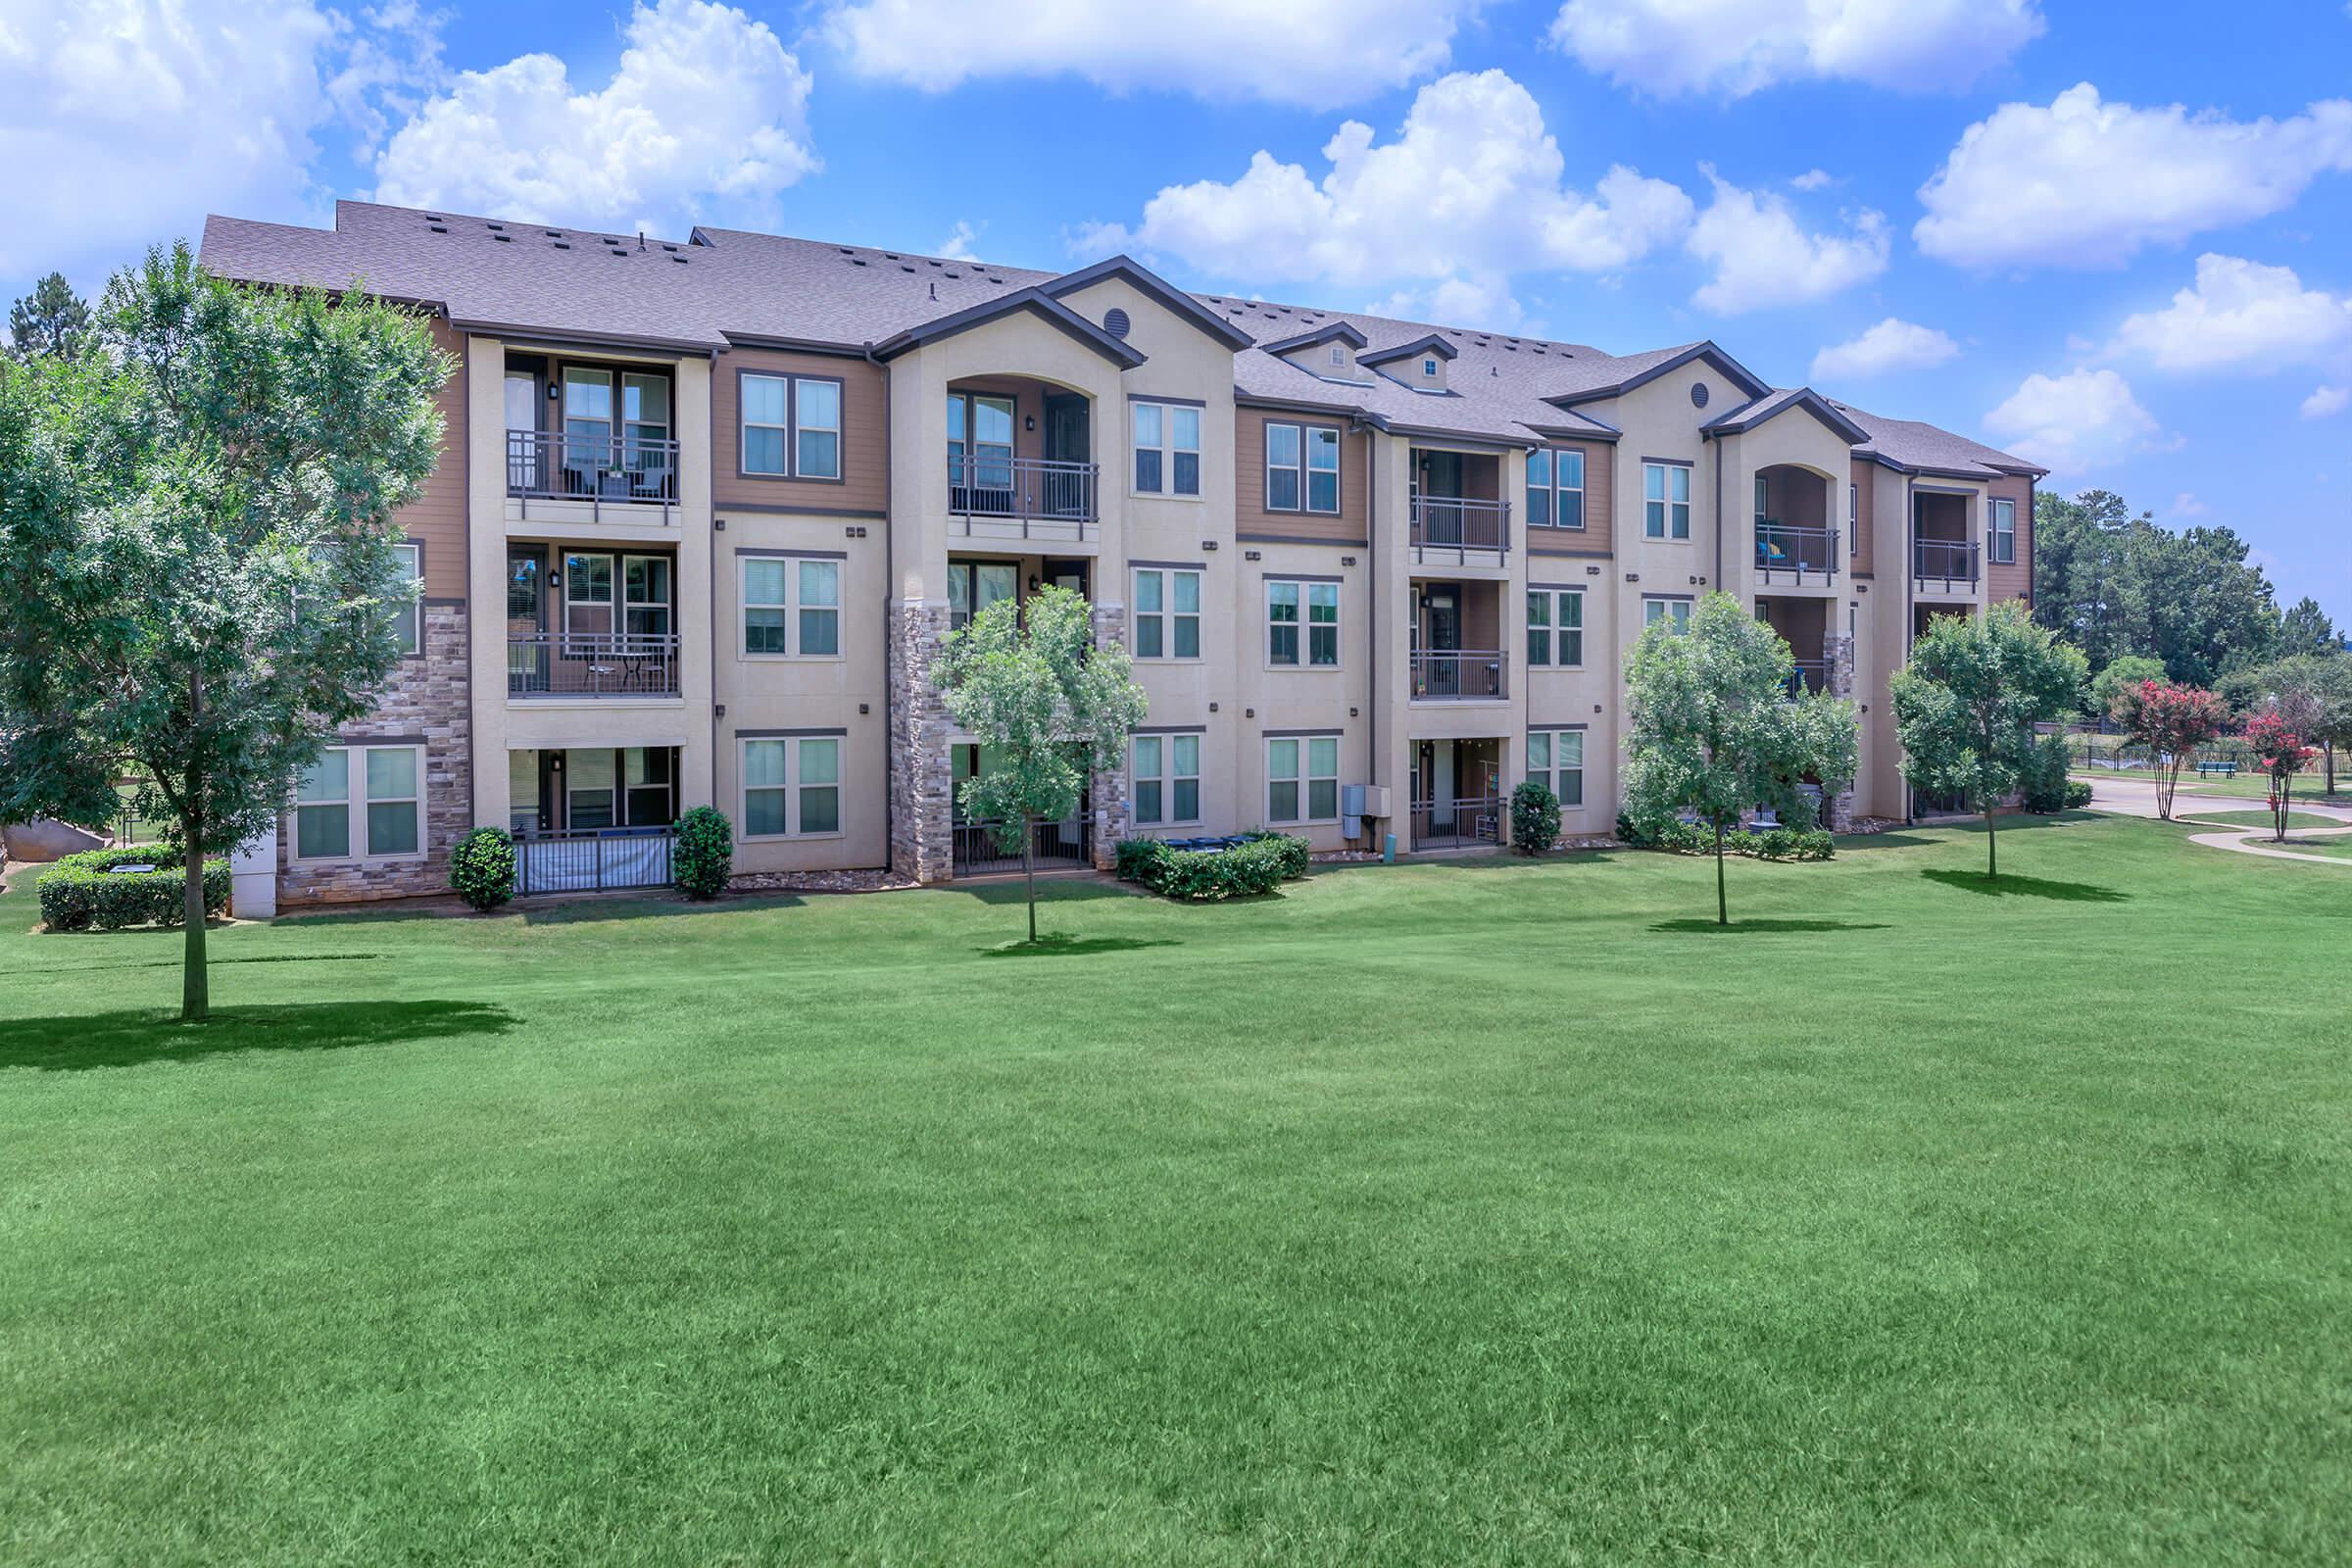 Paladin Apartments community building with green grass